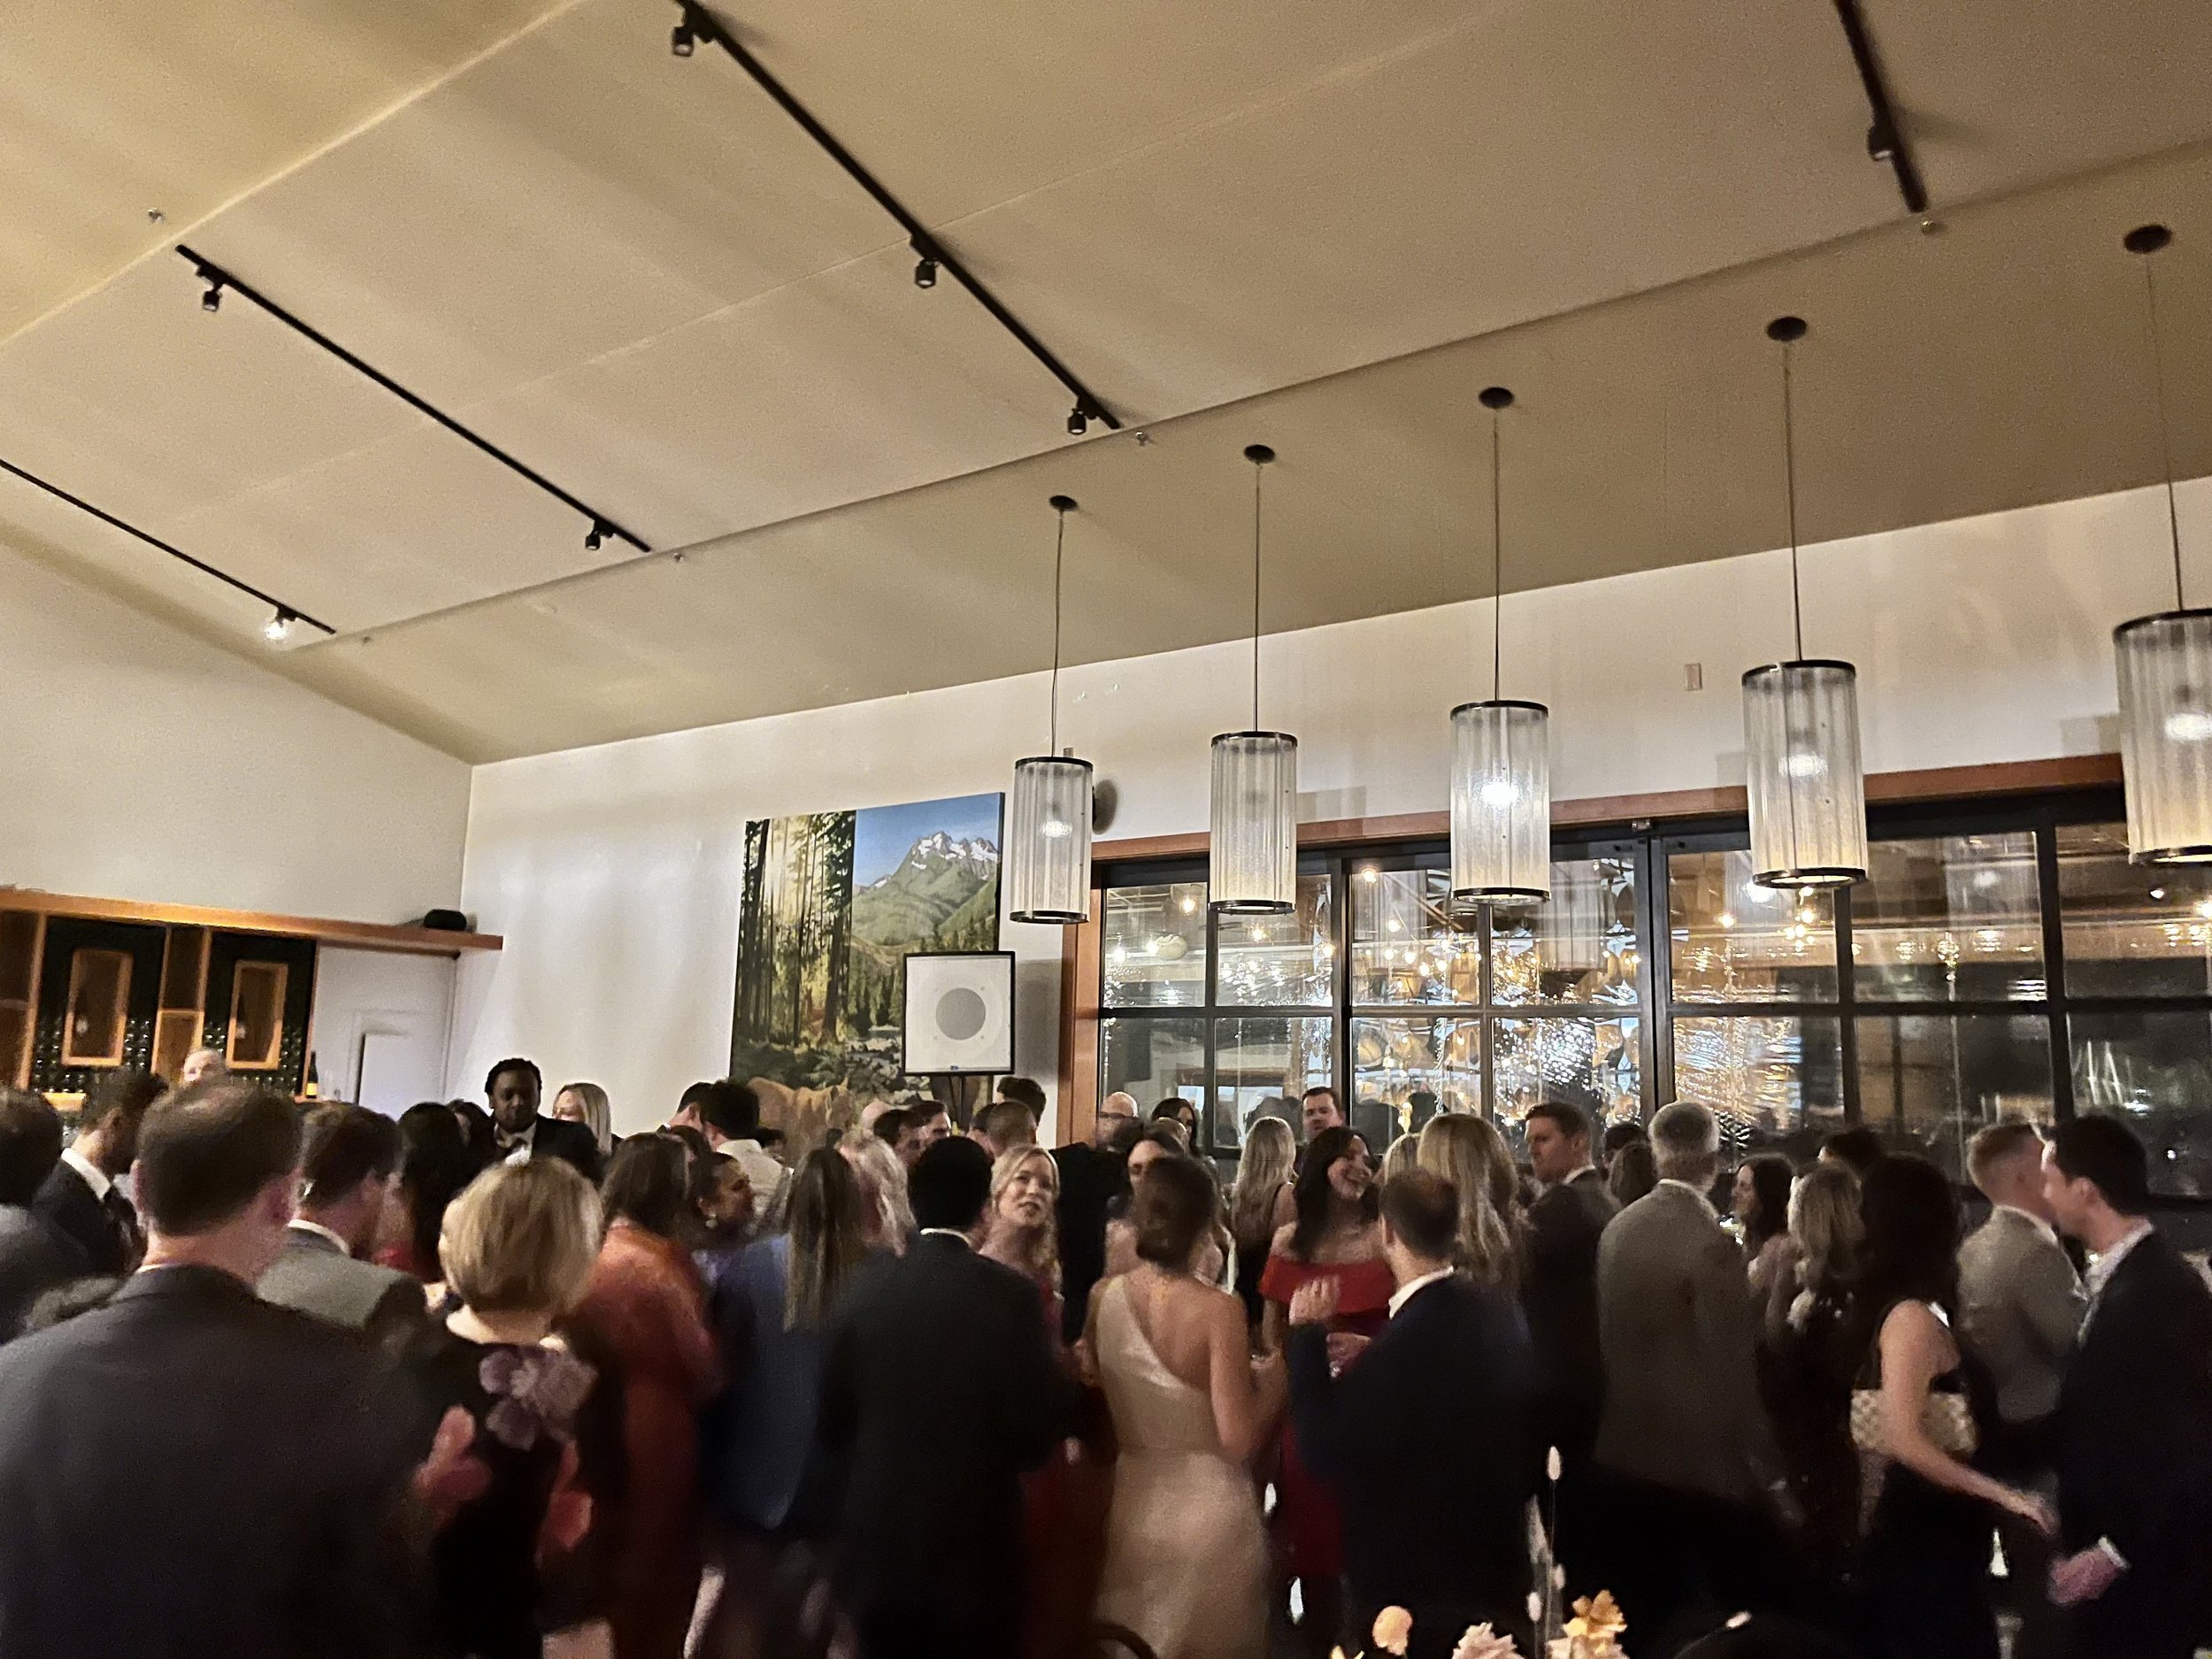 Packed Wedding Dancefloor at Church & State Winery, DJ Icy Touch on the decks, 2022